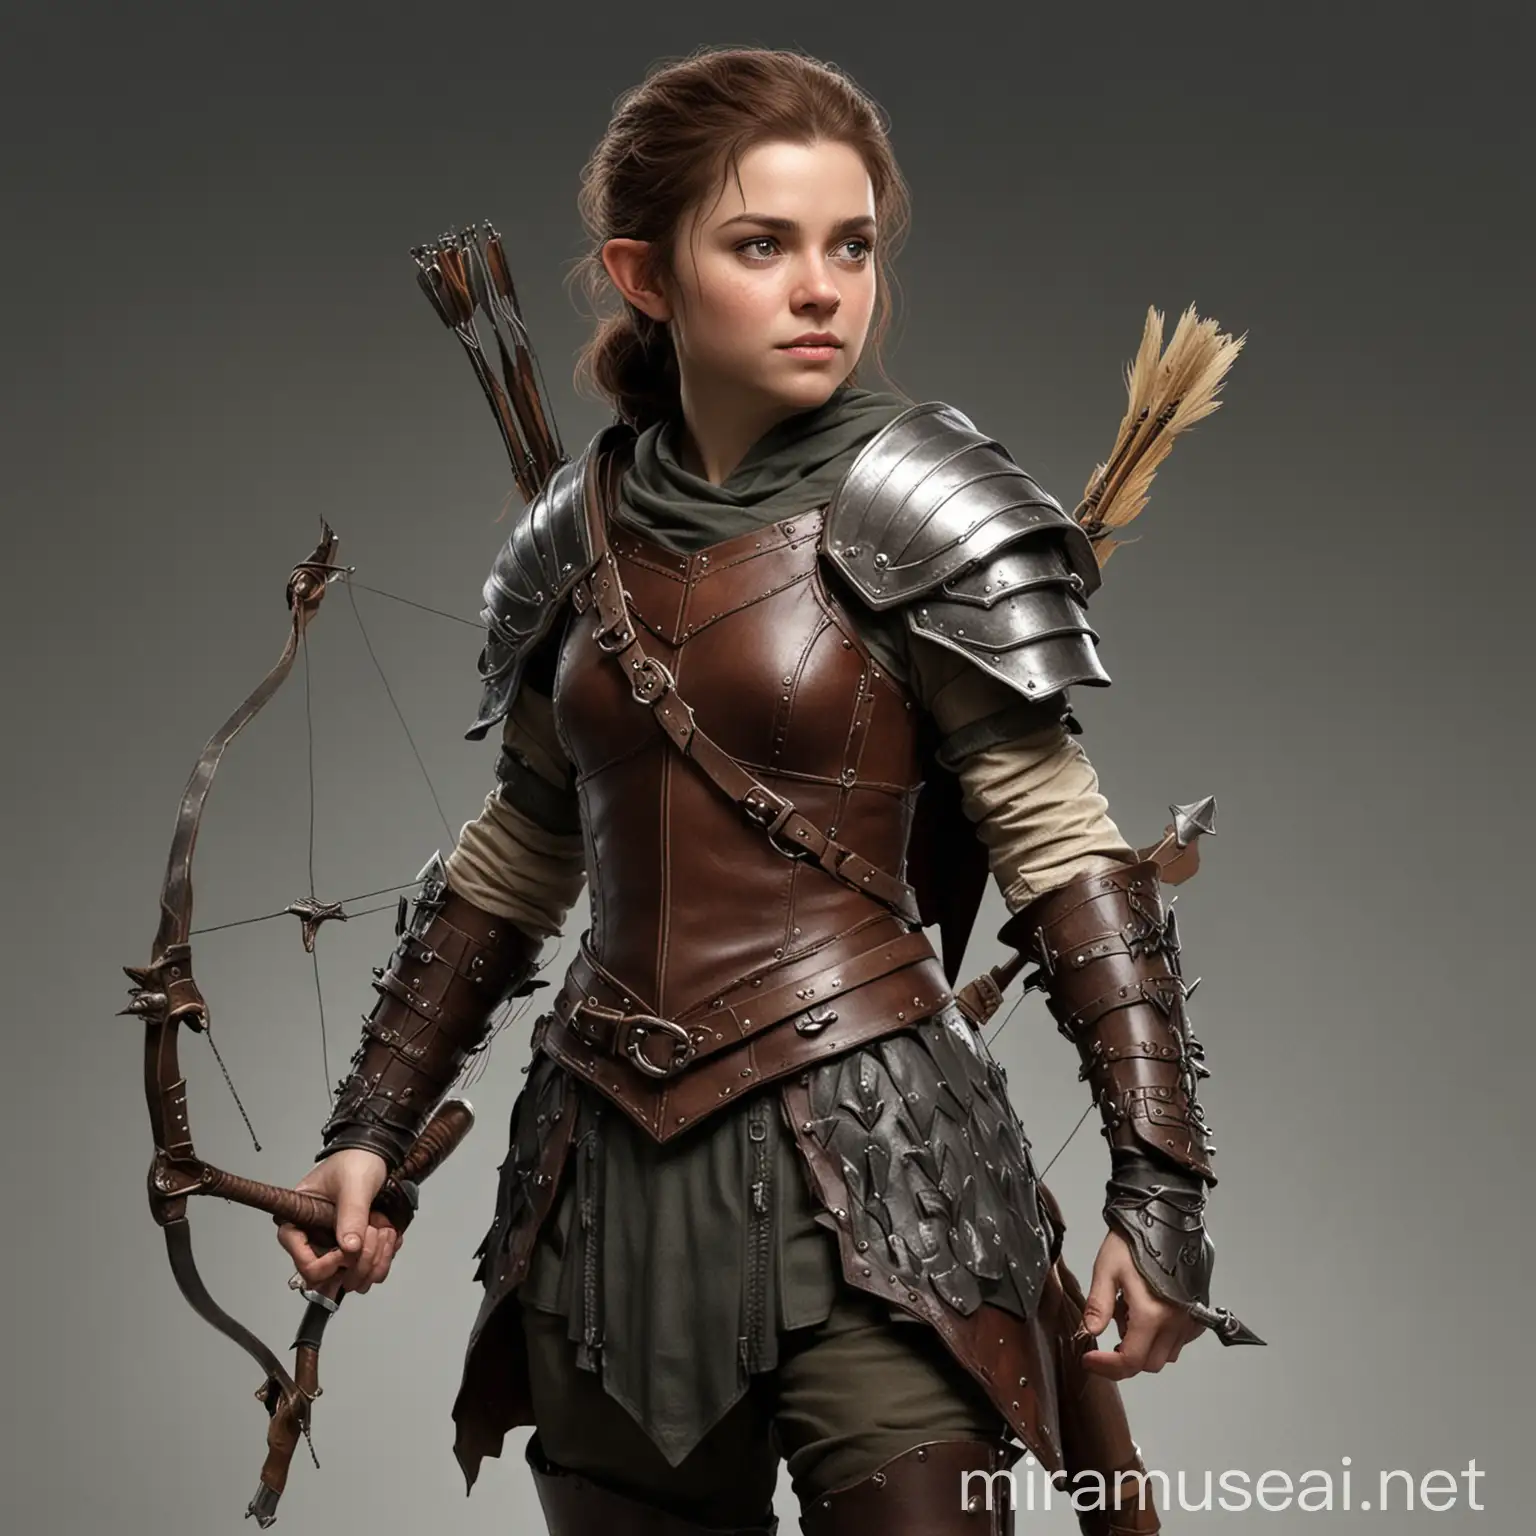 Female Halfling she should be wearing siple leather armour with a quiver of arrows on her back and a bow. She should also have a prosthetic arm 